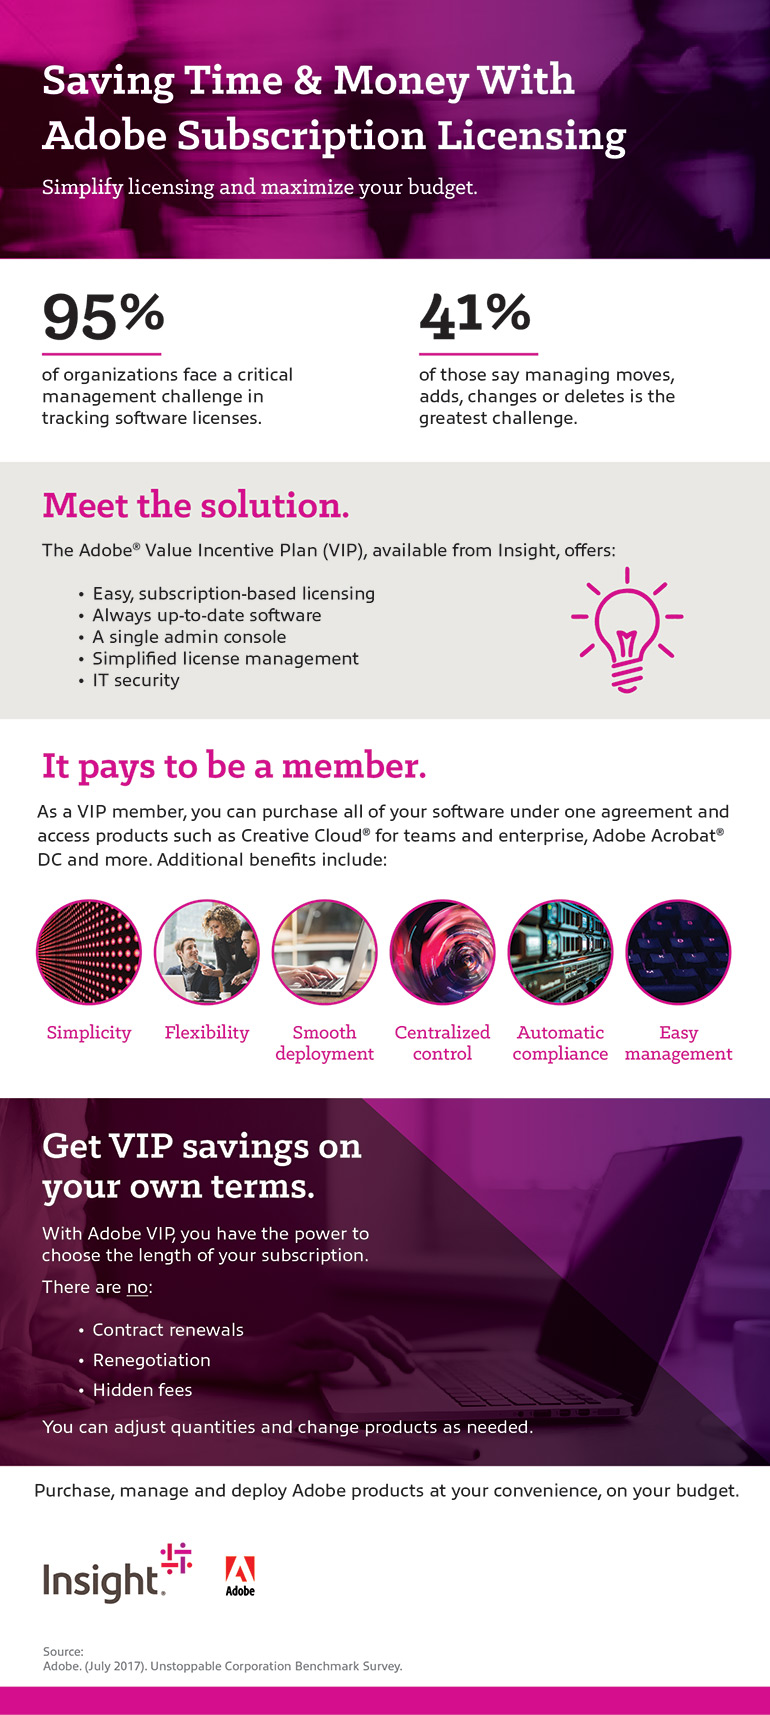 Saving Time and Money With Adobe Subscription Licensing Infographic